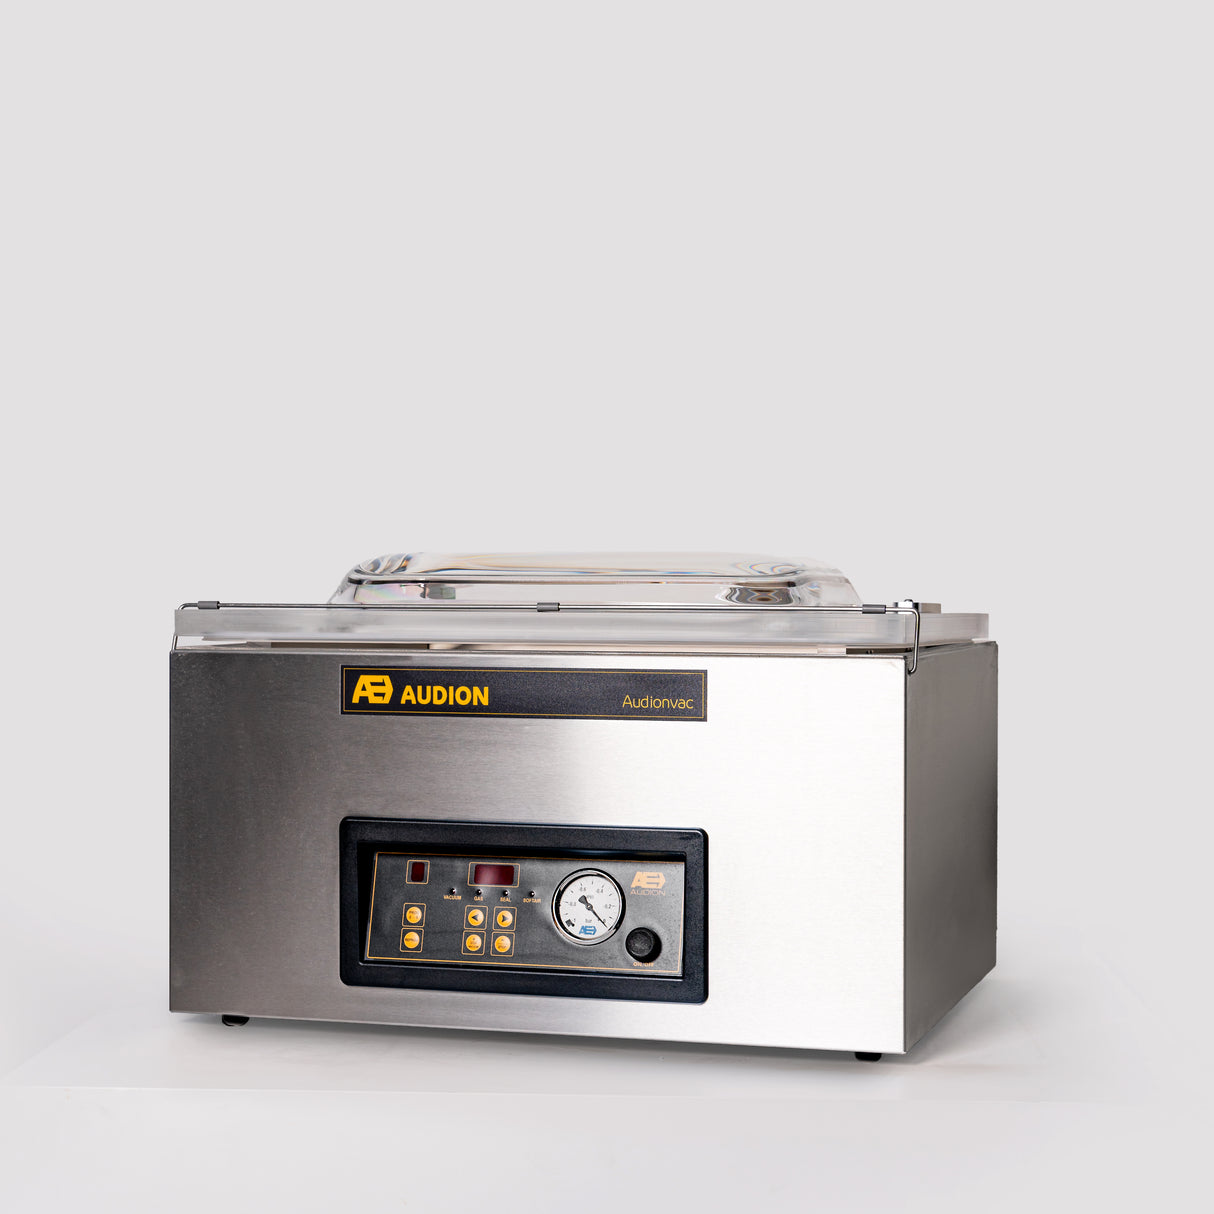 Audion Vacuum Packing Machine Benchtop Wide Chamber 163W